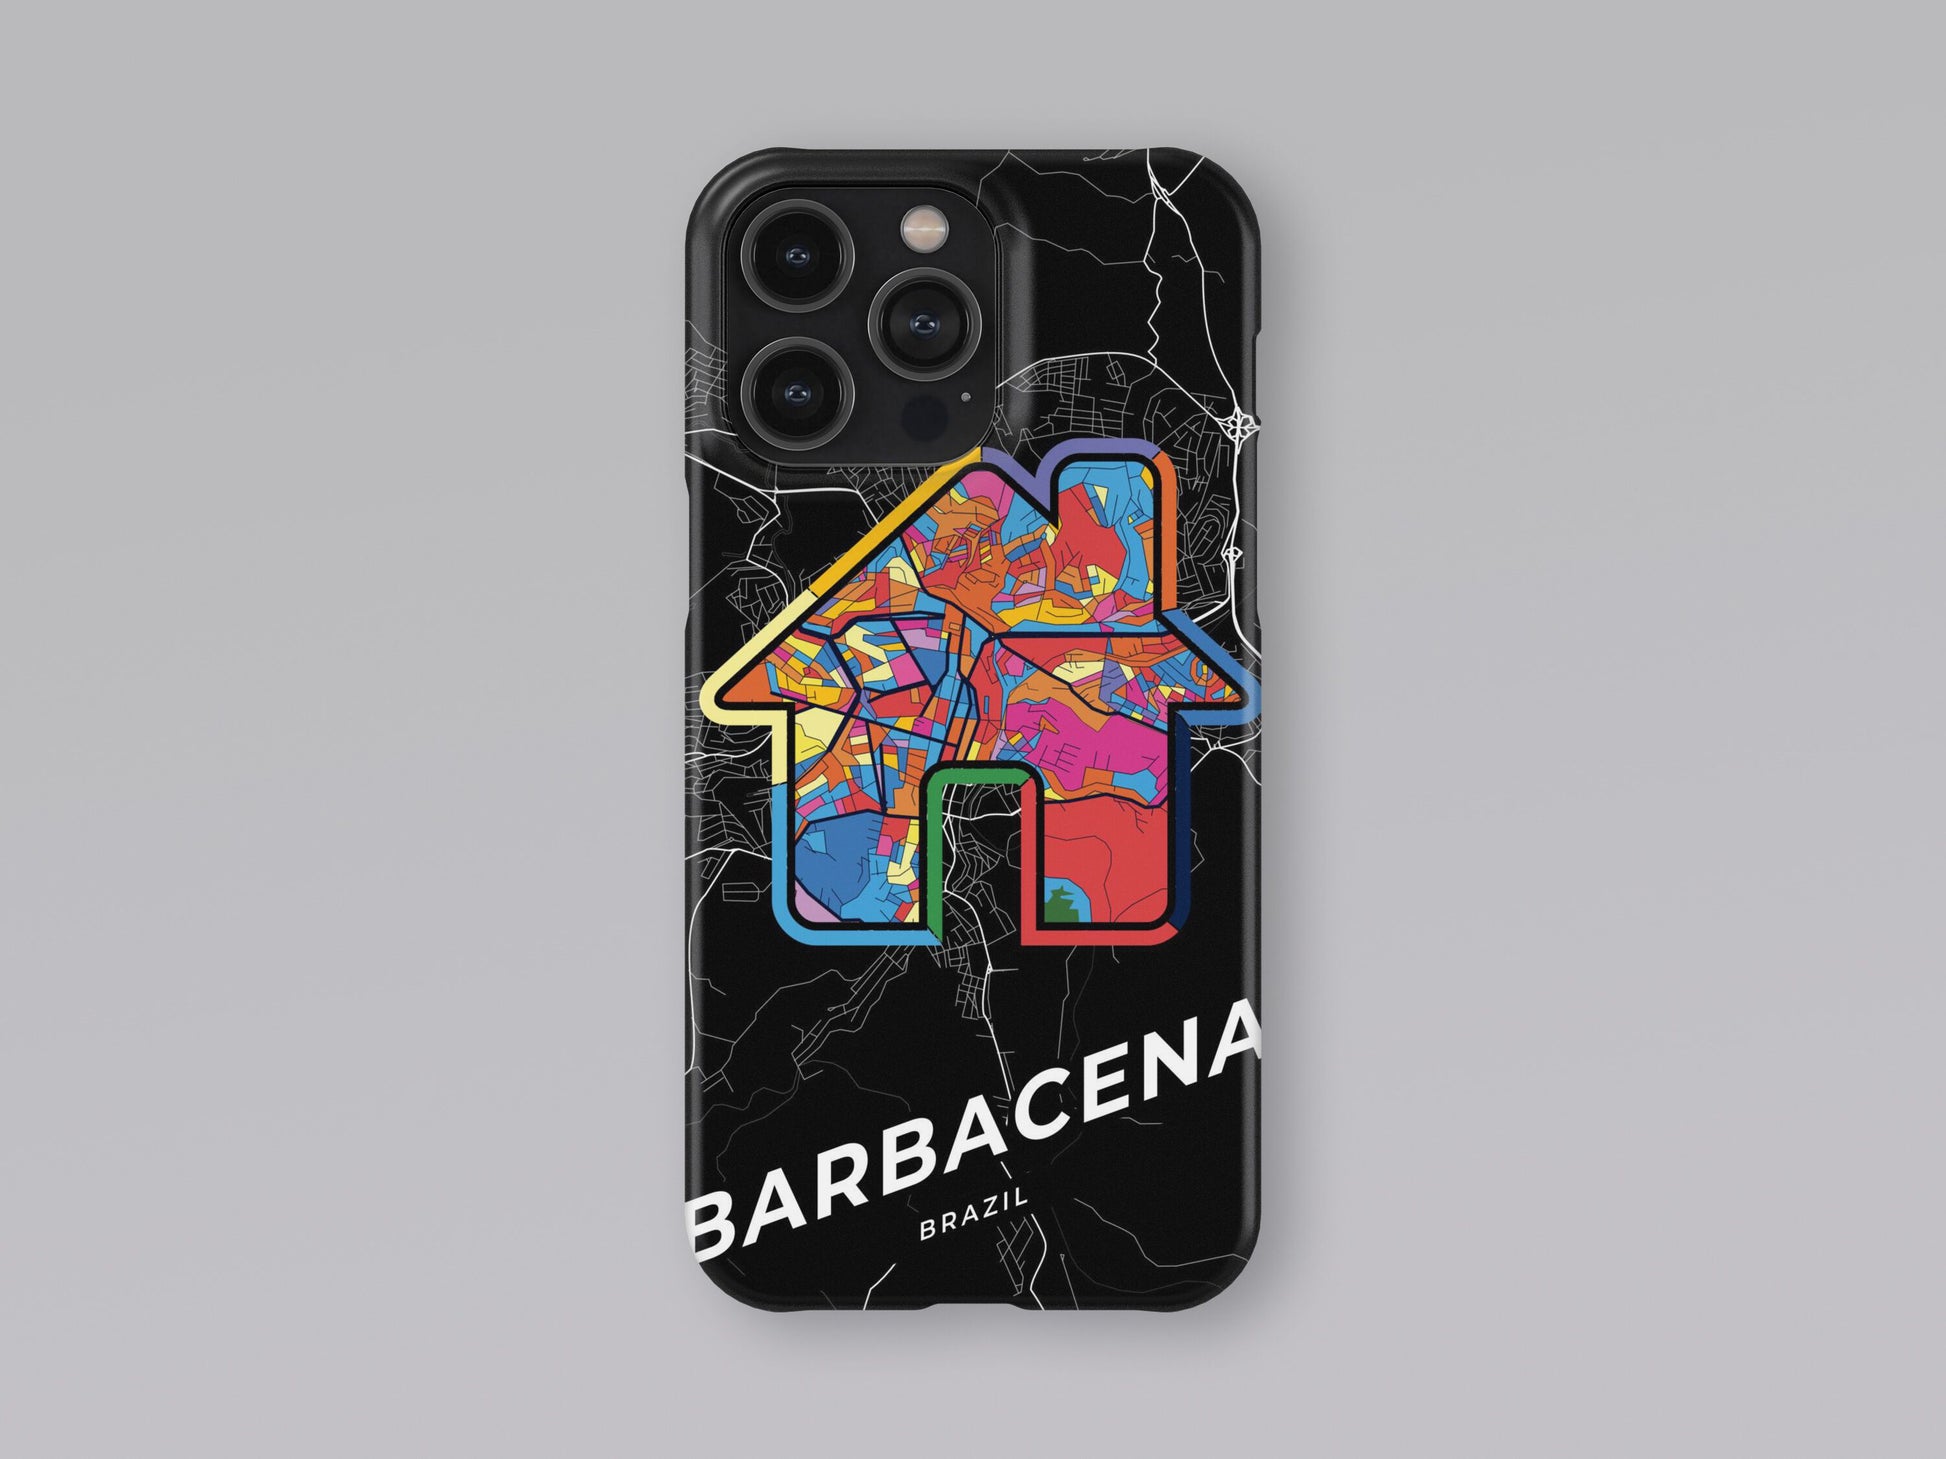 Barbacena Brazil slim phone case with colorful icon. Birthday, wedding or housewarming gift. Couple match cases. 3